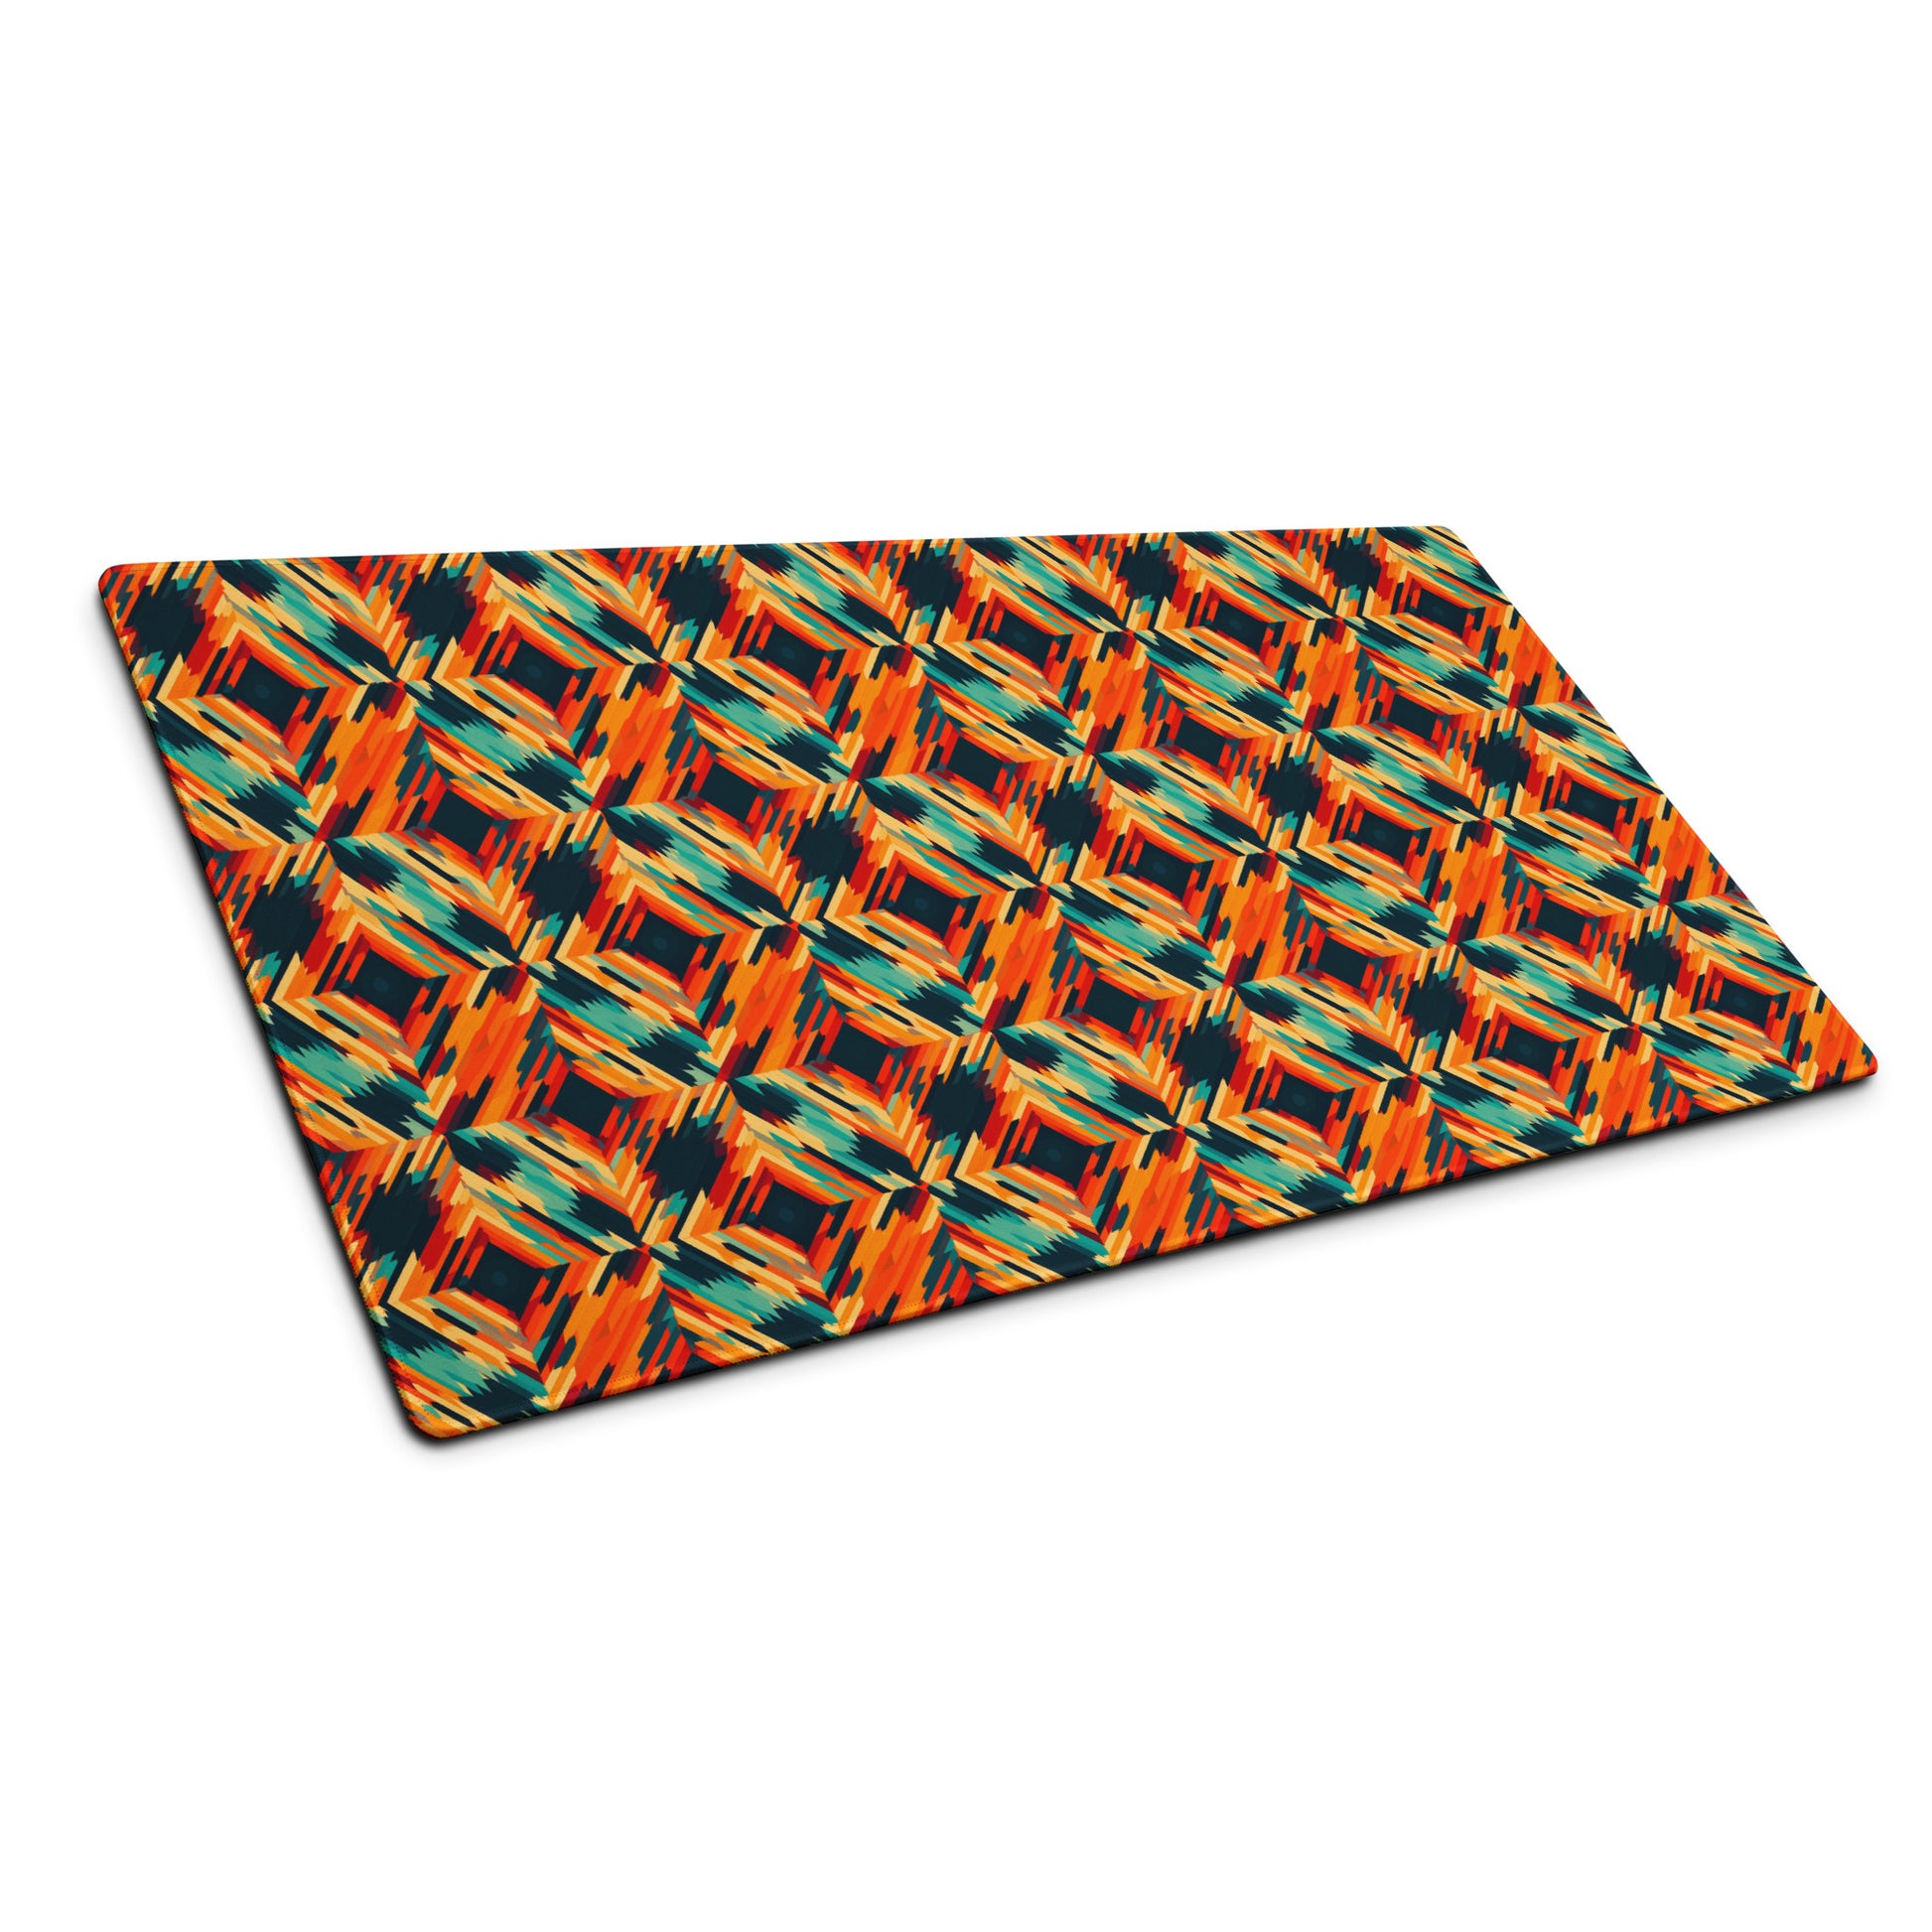 A 36" x 18" desk pad with a tiled abstract pattern on it shown at an angle. Orange in color.